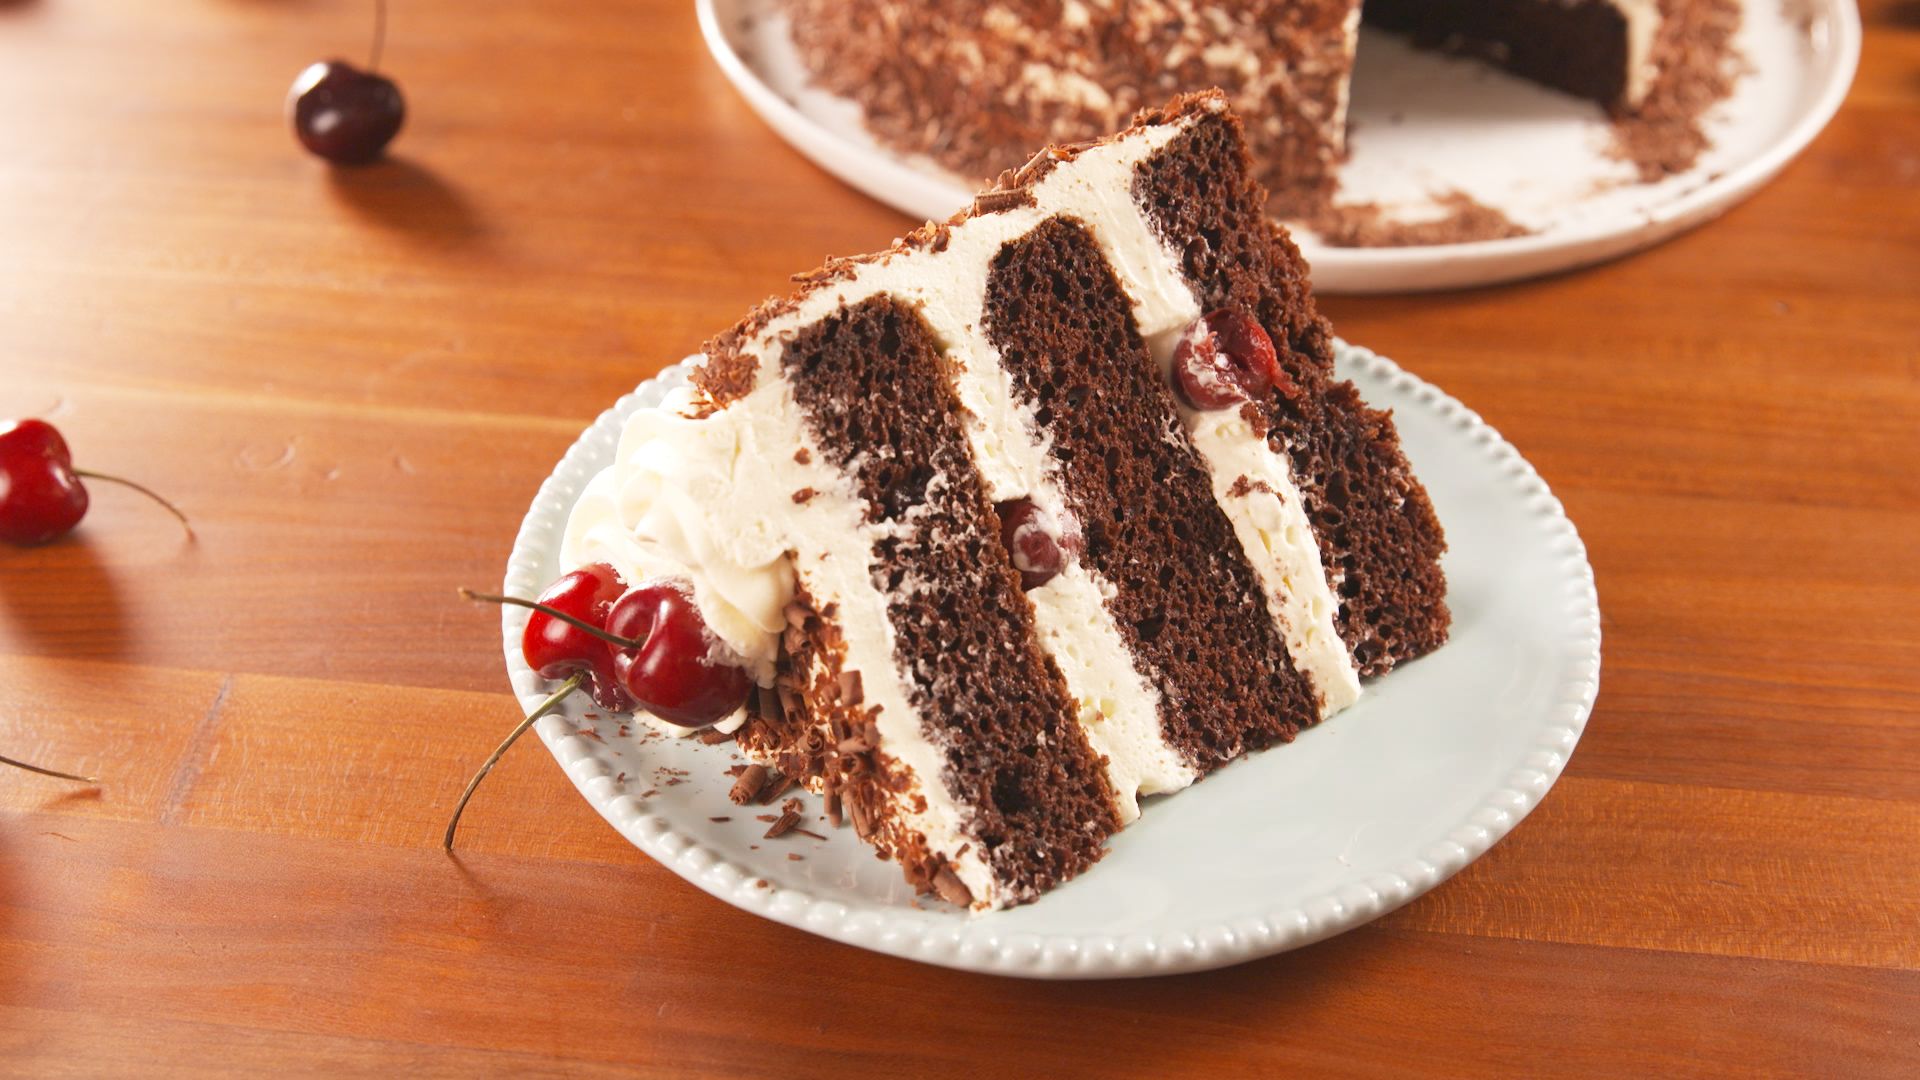 The Real Deal: Black Forest Cake - Jenny is baking